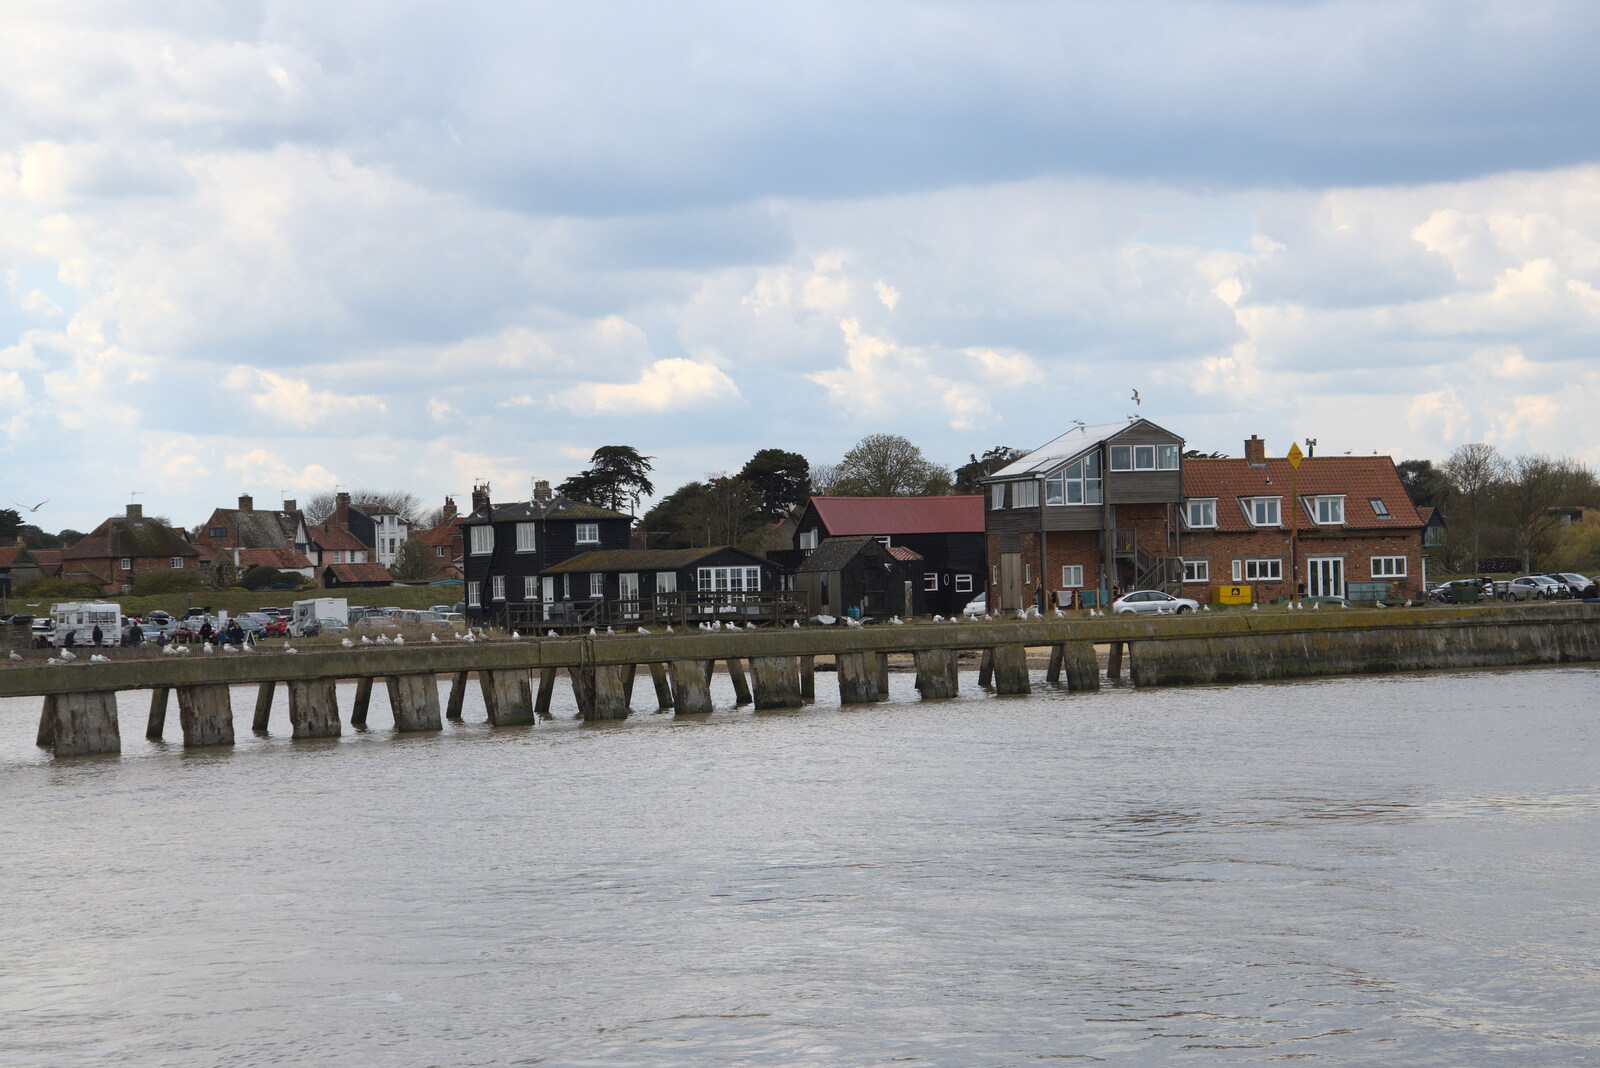 Looking over the Blyth to Walberswick from A Chilly Trip to the Beach, Southwold Harbour, Suffolk - 2nd May 2021